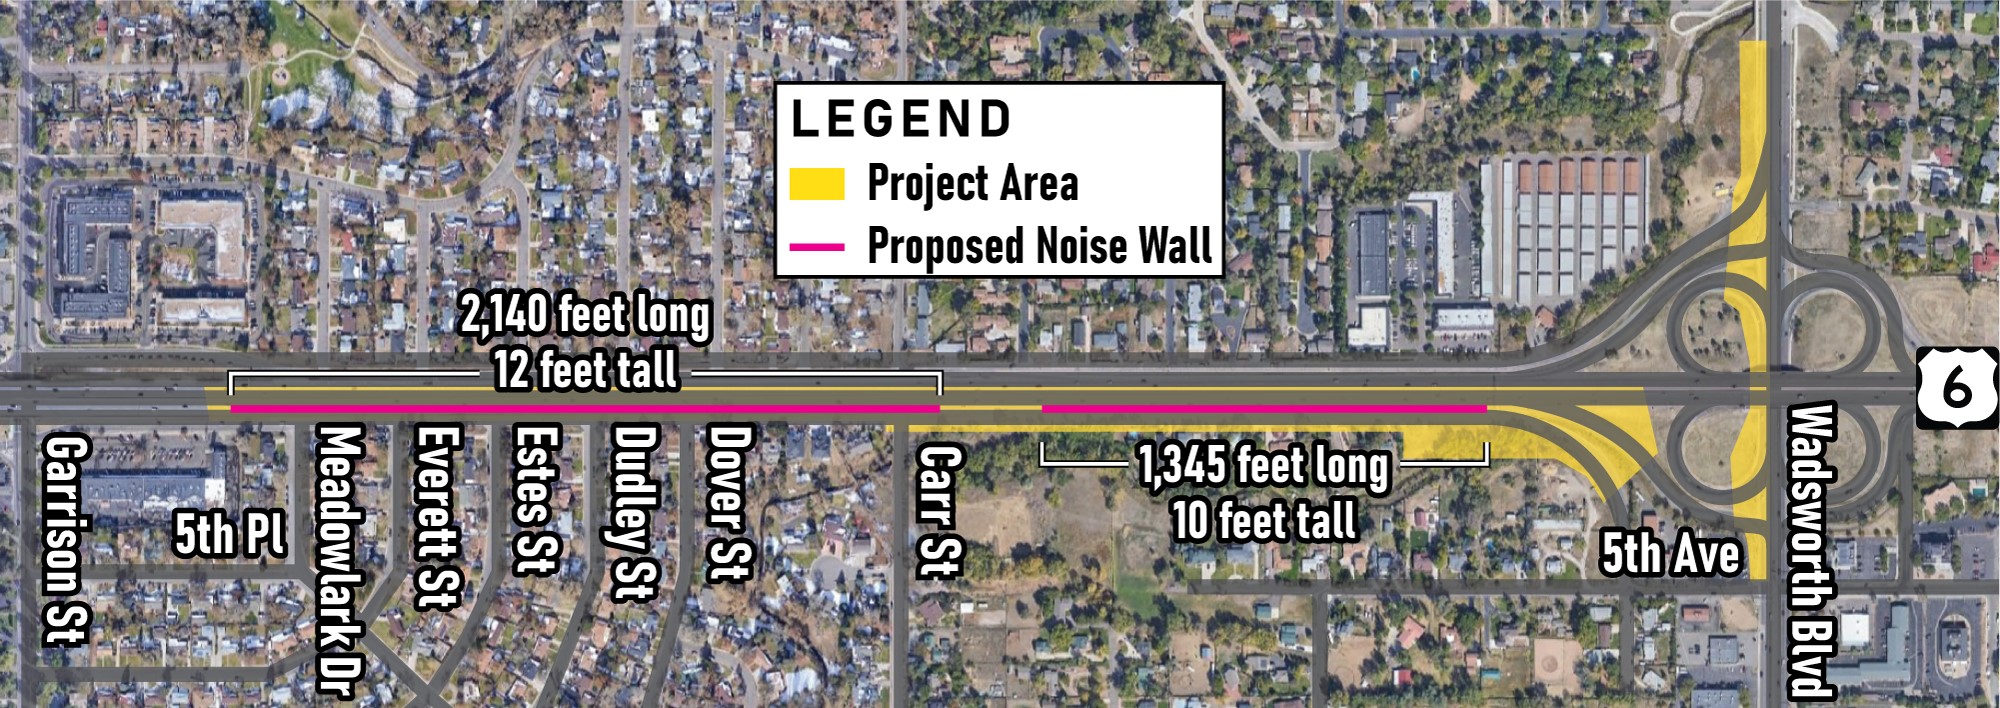 US 6 Wads Noise Wall Map.jpg detail image